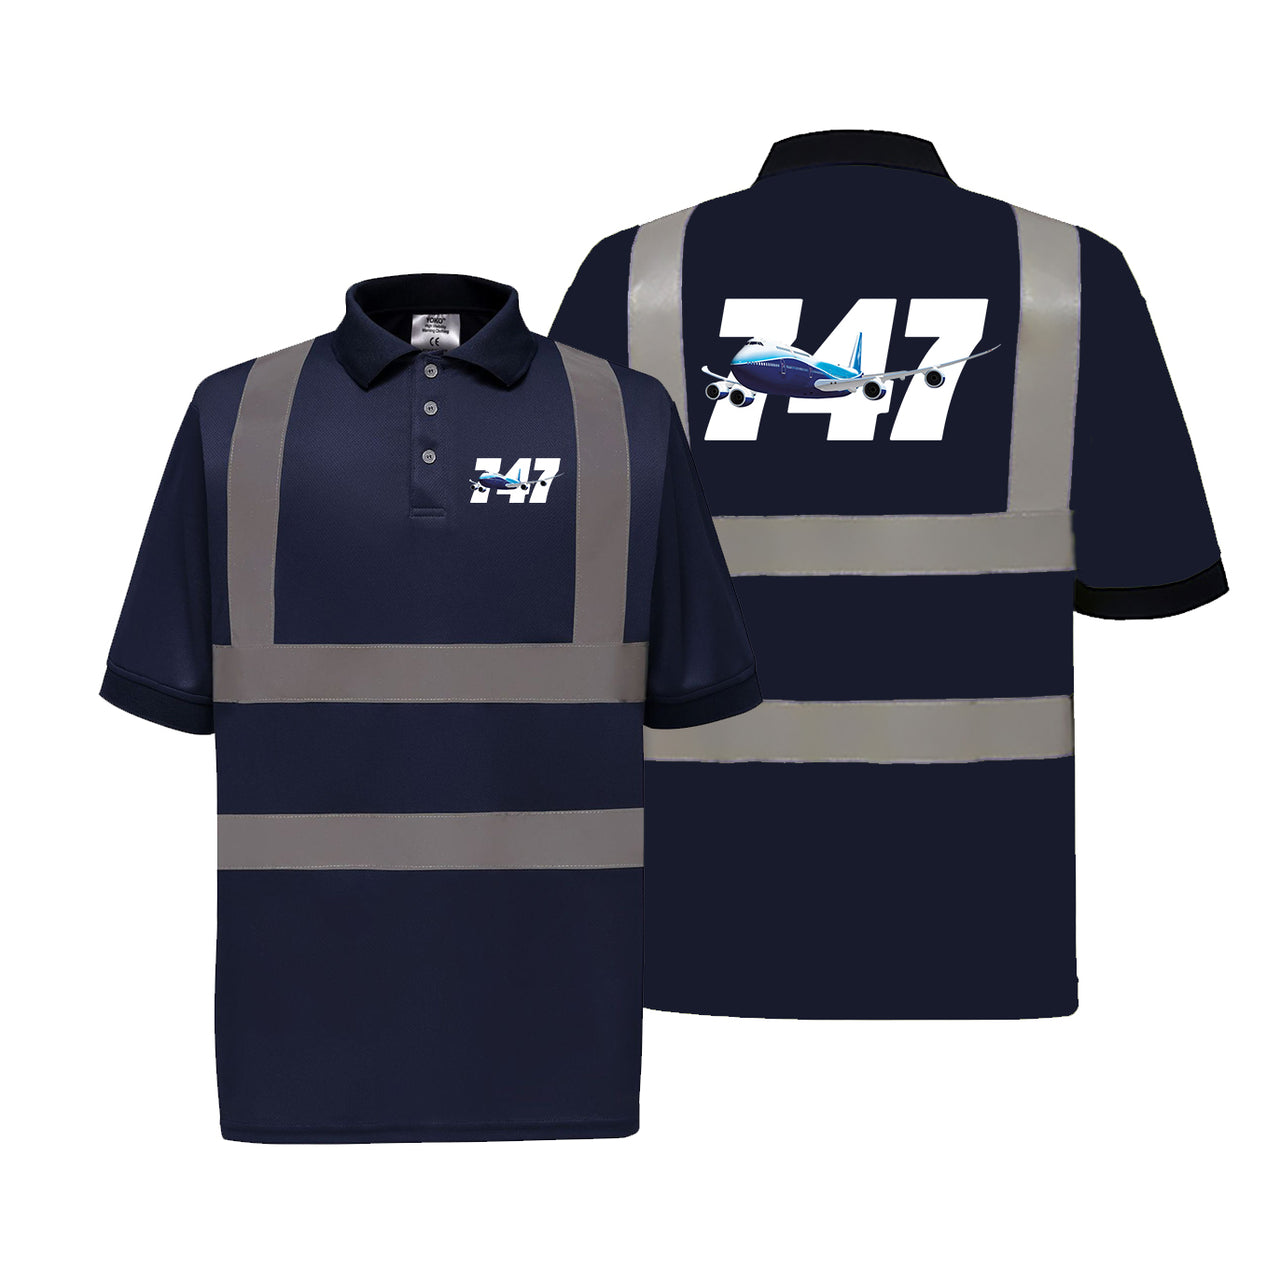 Super Boeing 747 Designed Reflective Polo T-Shirts